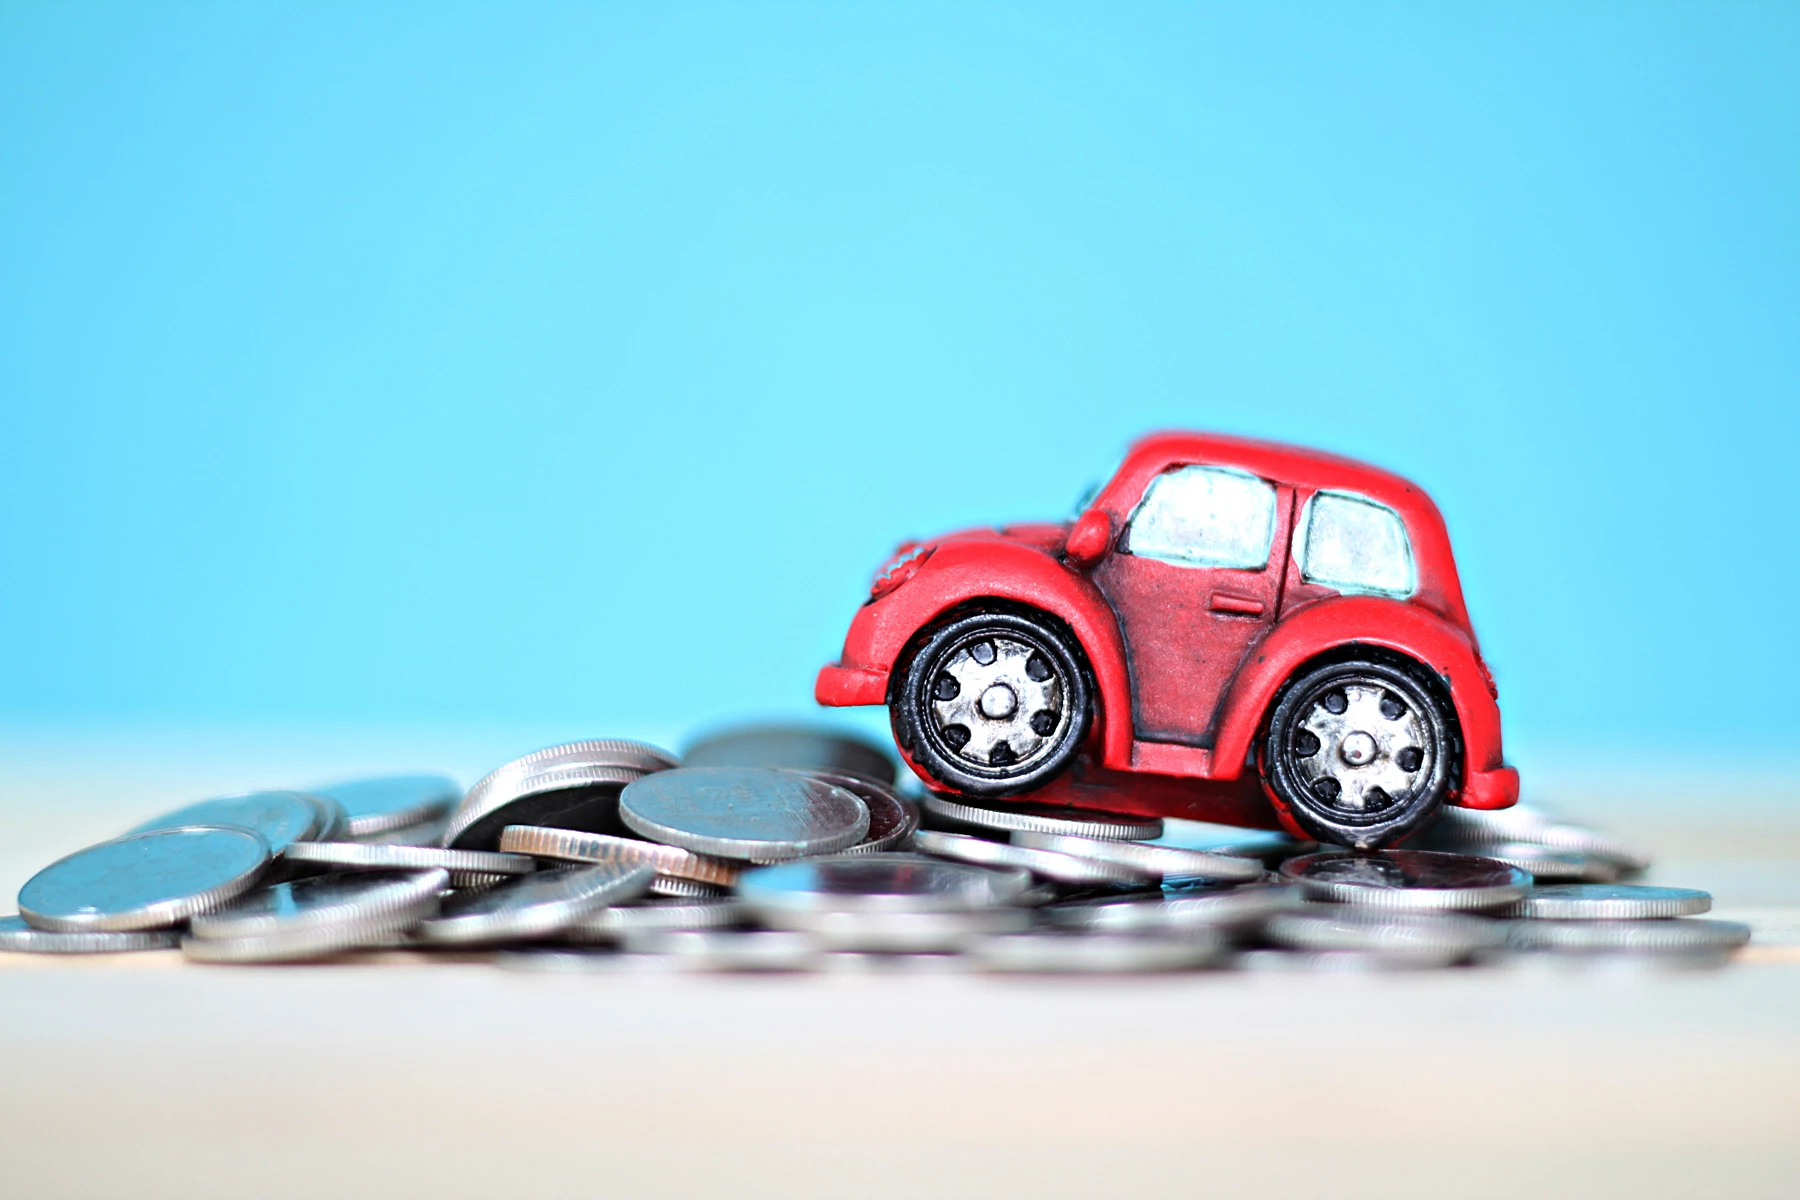 A model car on a pile of silver coins against a plain blue background